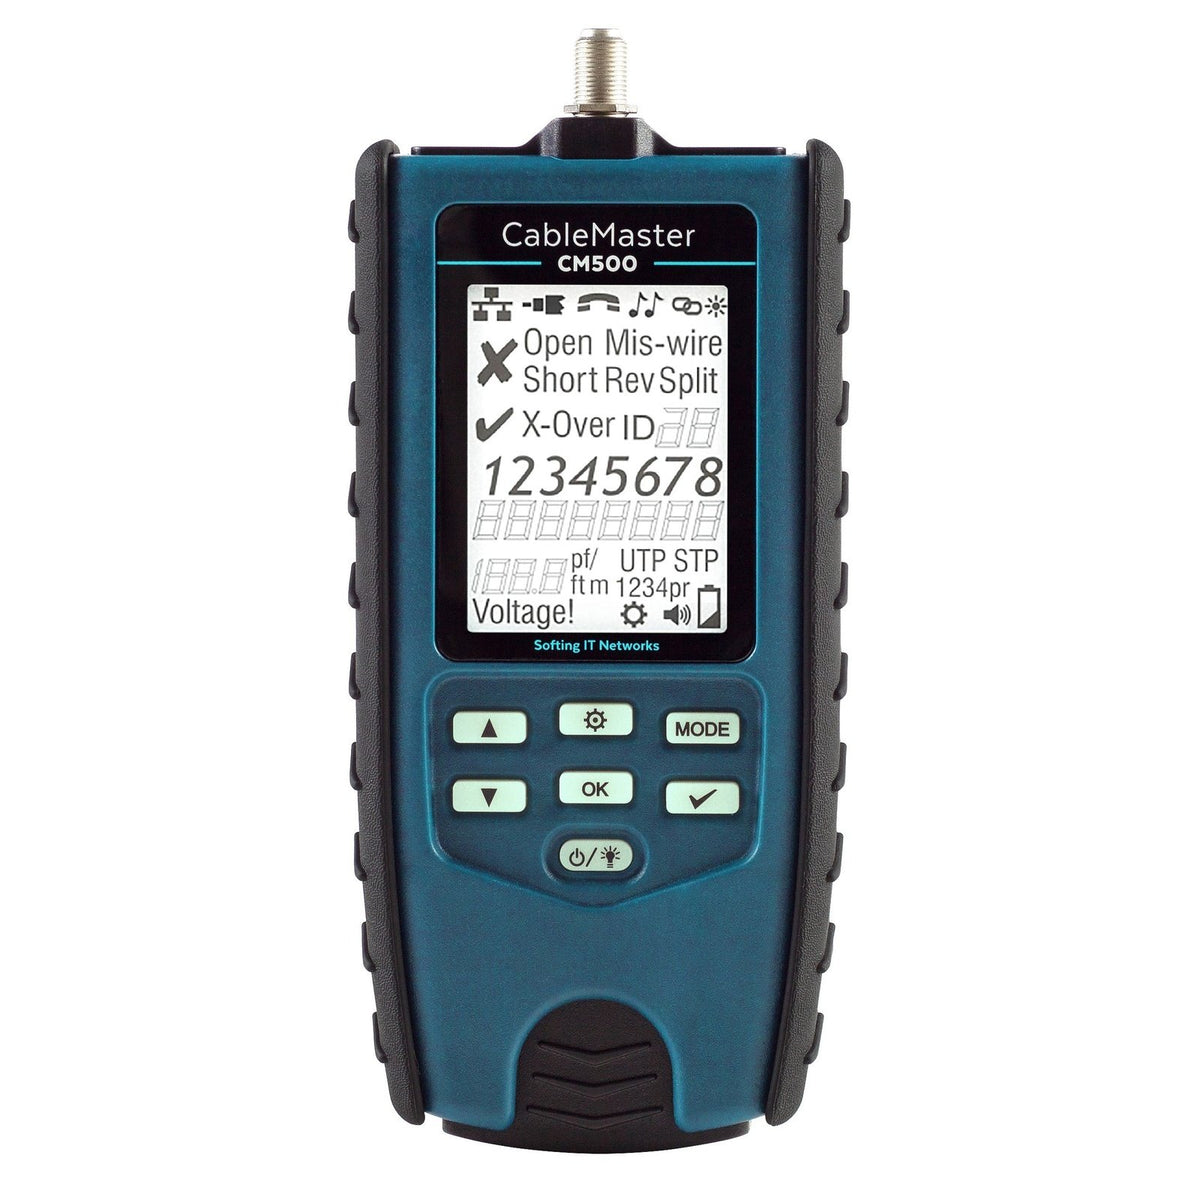 softing CableMaster 500, mit Kabellängenmessung, TEST softing (ehemals Psiber) coax ethernet kabeltester single pair ethernet softing tone voice A150573-1